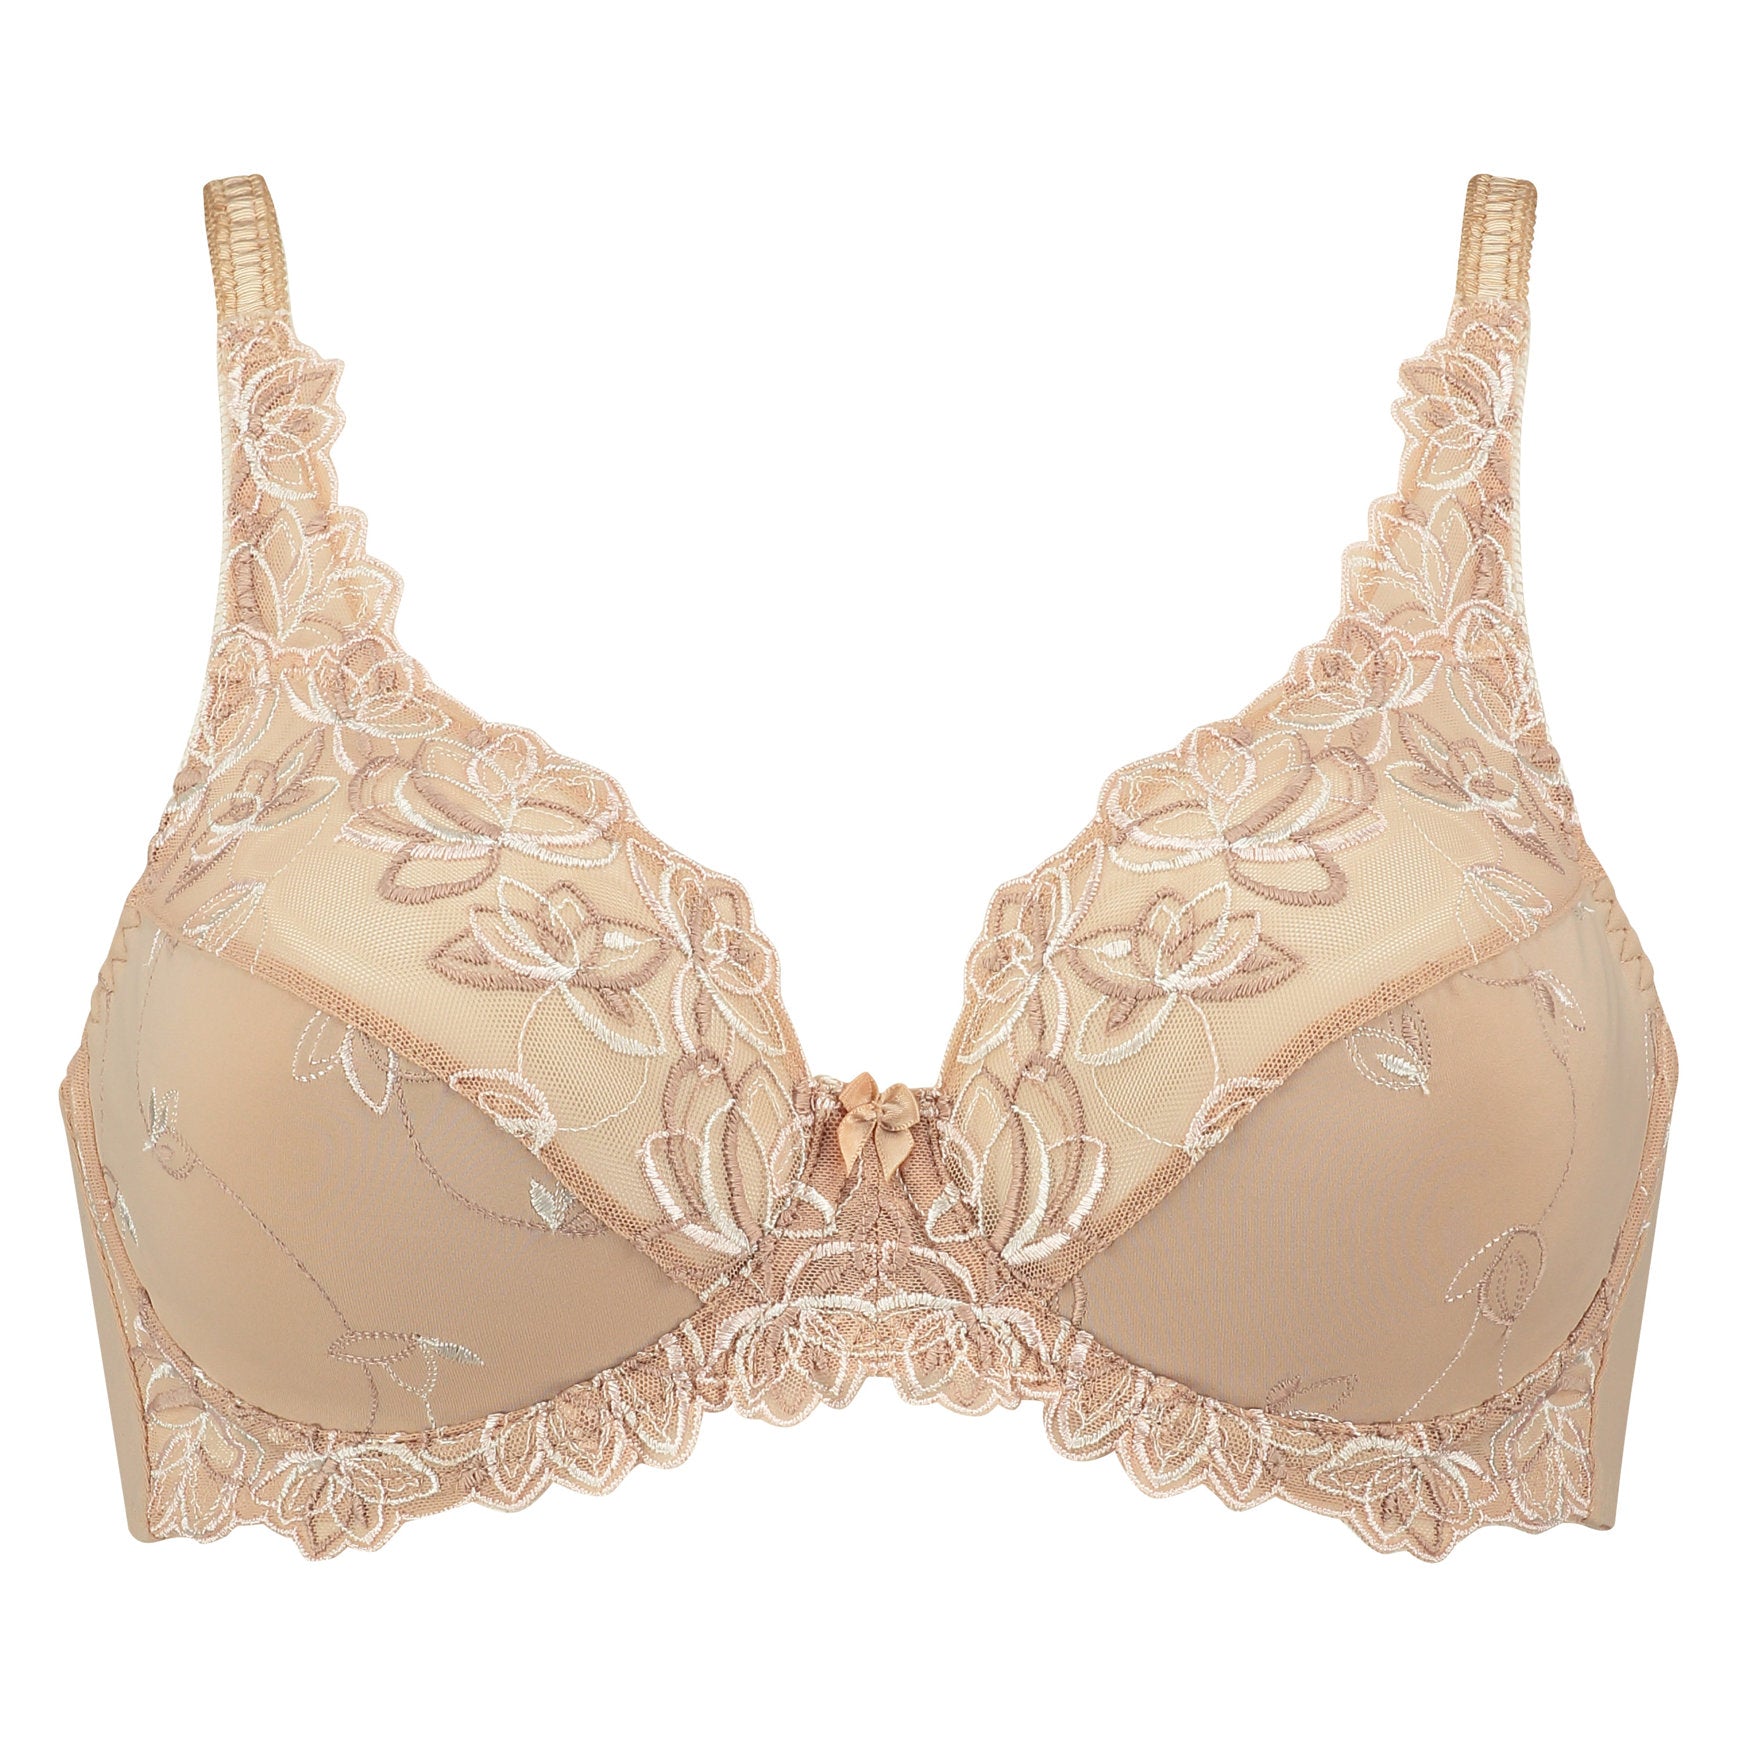 Diva Bra Full Support In Different Cup Sizes_103831_Rugby Tan_01